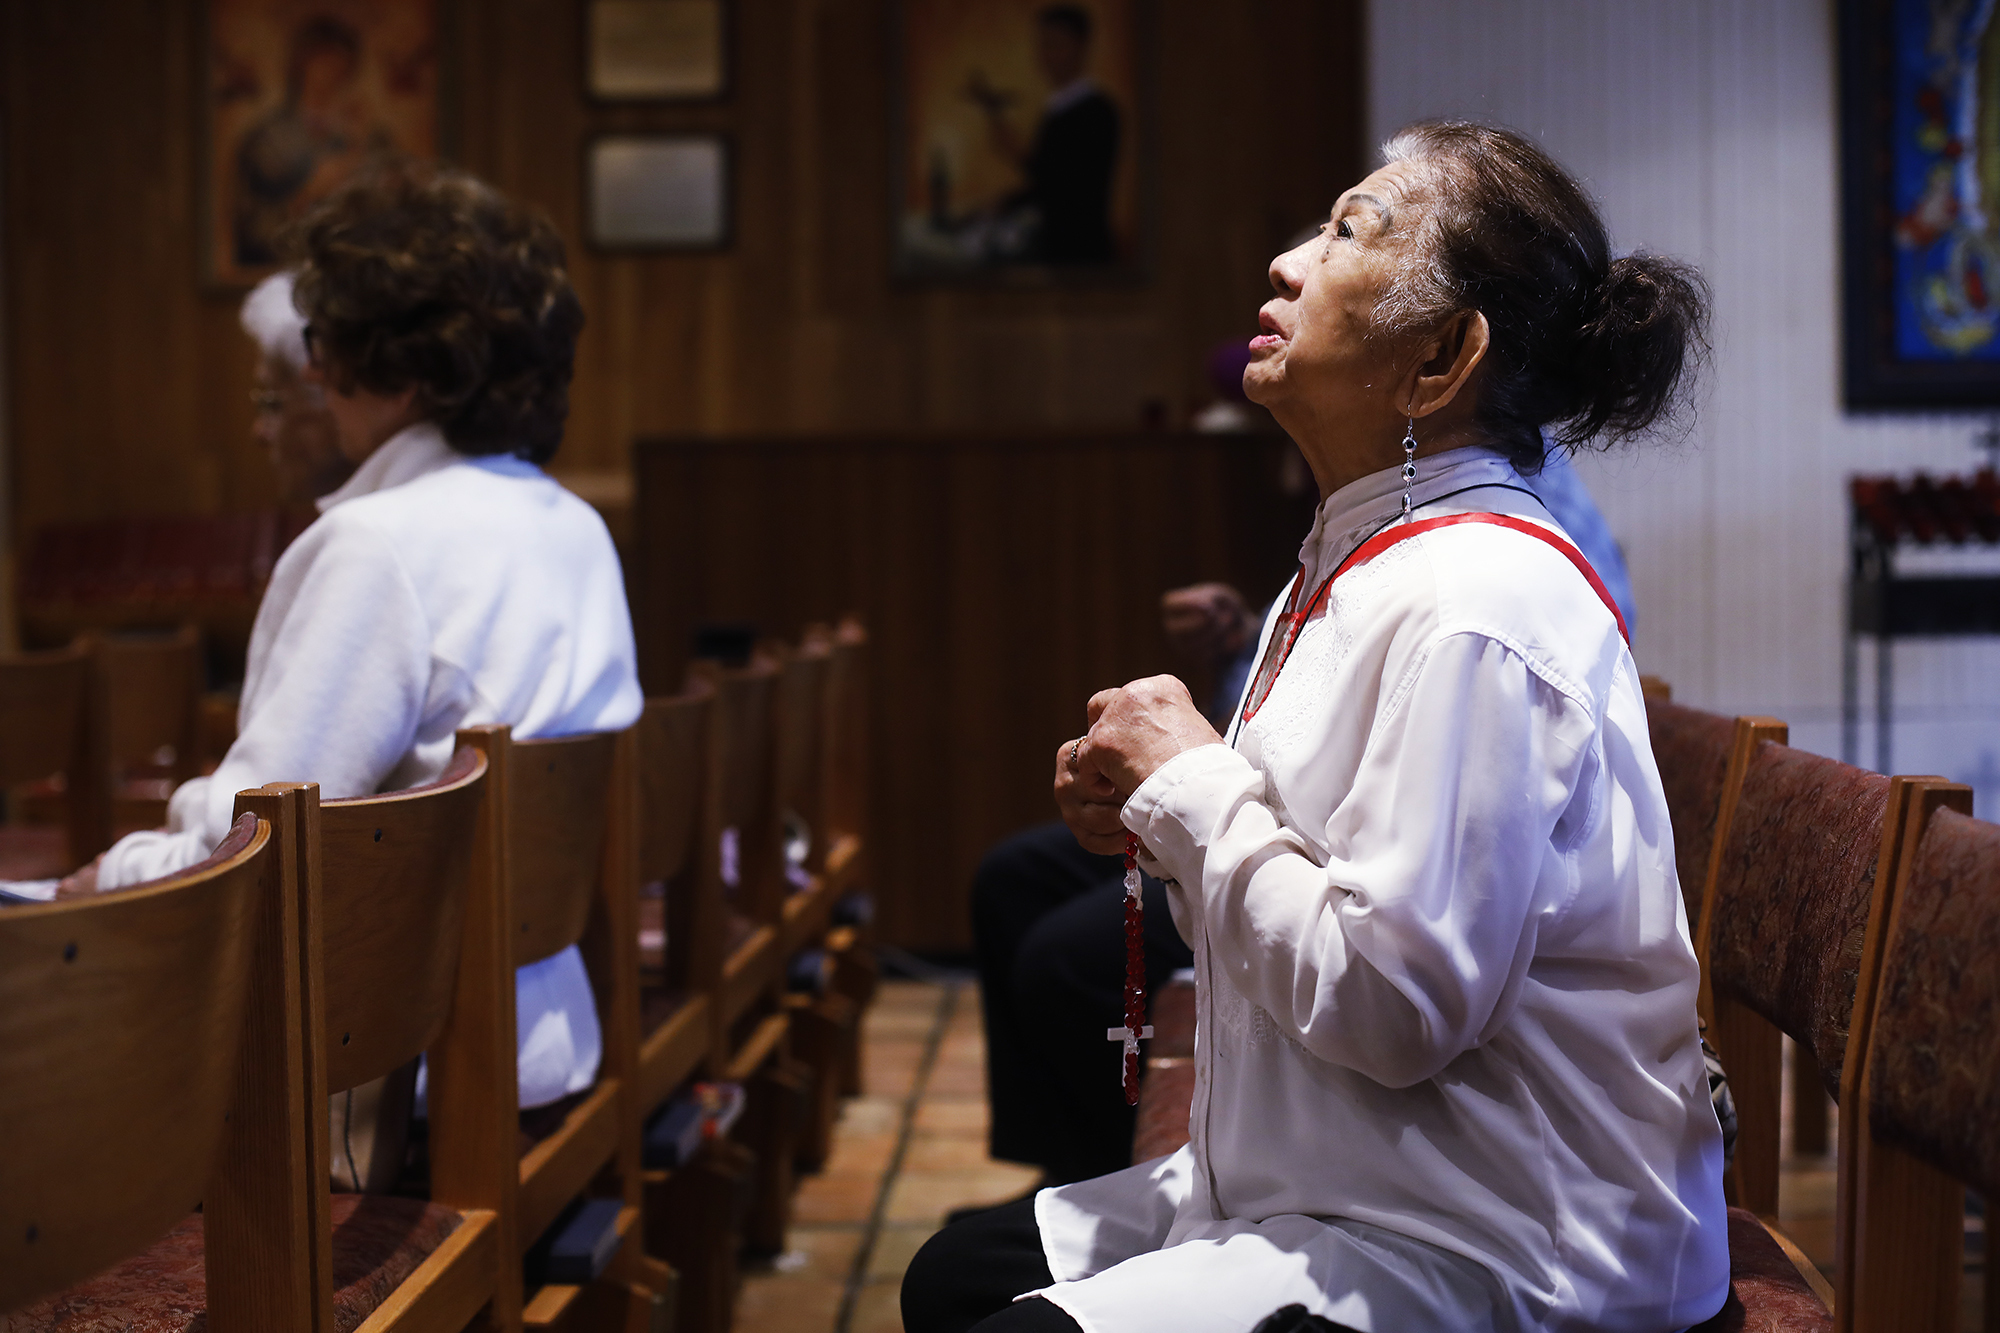 Esther Gianan, of Tampa, a retired registered nurse, prays for those who are affected by the coronavirus during Mass at St. Lawrence Catholic Church in Tampa, Fla., Friday, March 6, 2020. (Octavio Jones/Tampa Bay Times via AP)